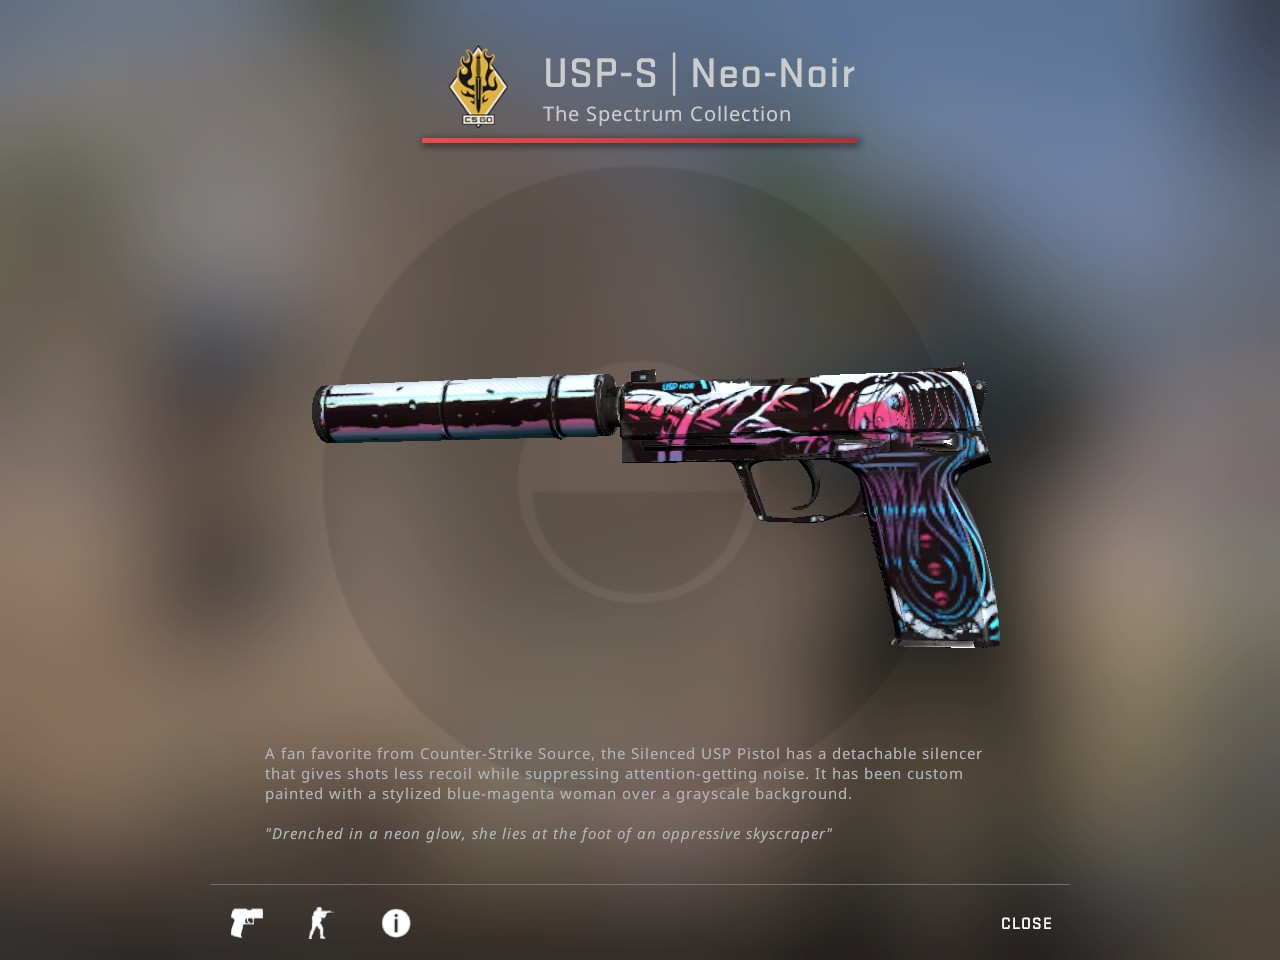 Havn til stede Kenya LaNrefNi on Twitter: "🤑 ITS GIVEAWAY TIME 🤑 🎁Giving away an USP-S | Neo  Noir (Field-Tested) 🎁 💰To Enter: ✓follow @MorEeCsgo ✓Subscribe to my  youtube channel ( https://t.co/Et8ff2gNnS ) ✓Retweet 🏆Winner will